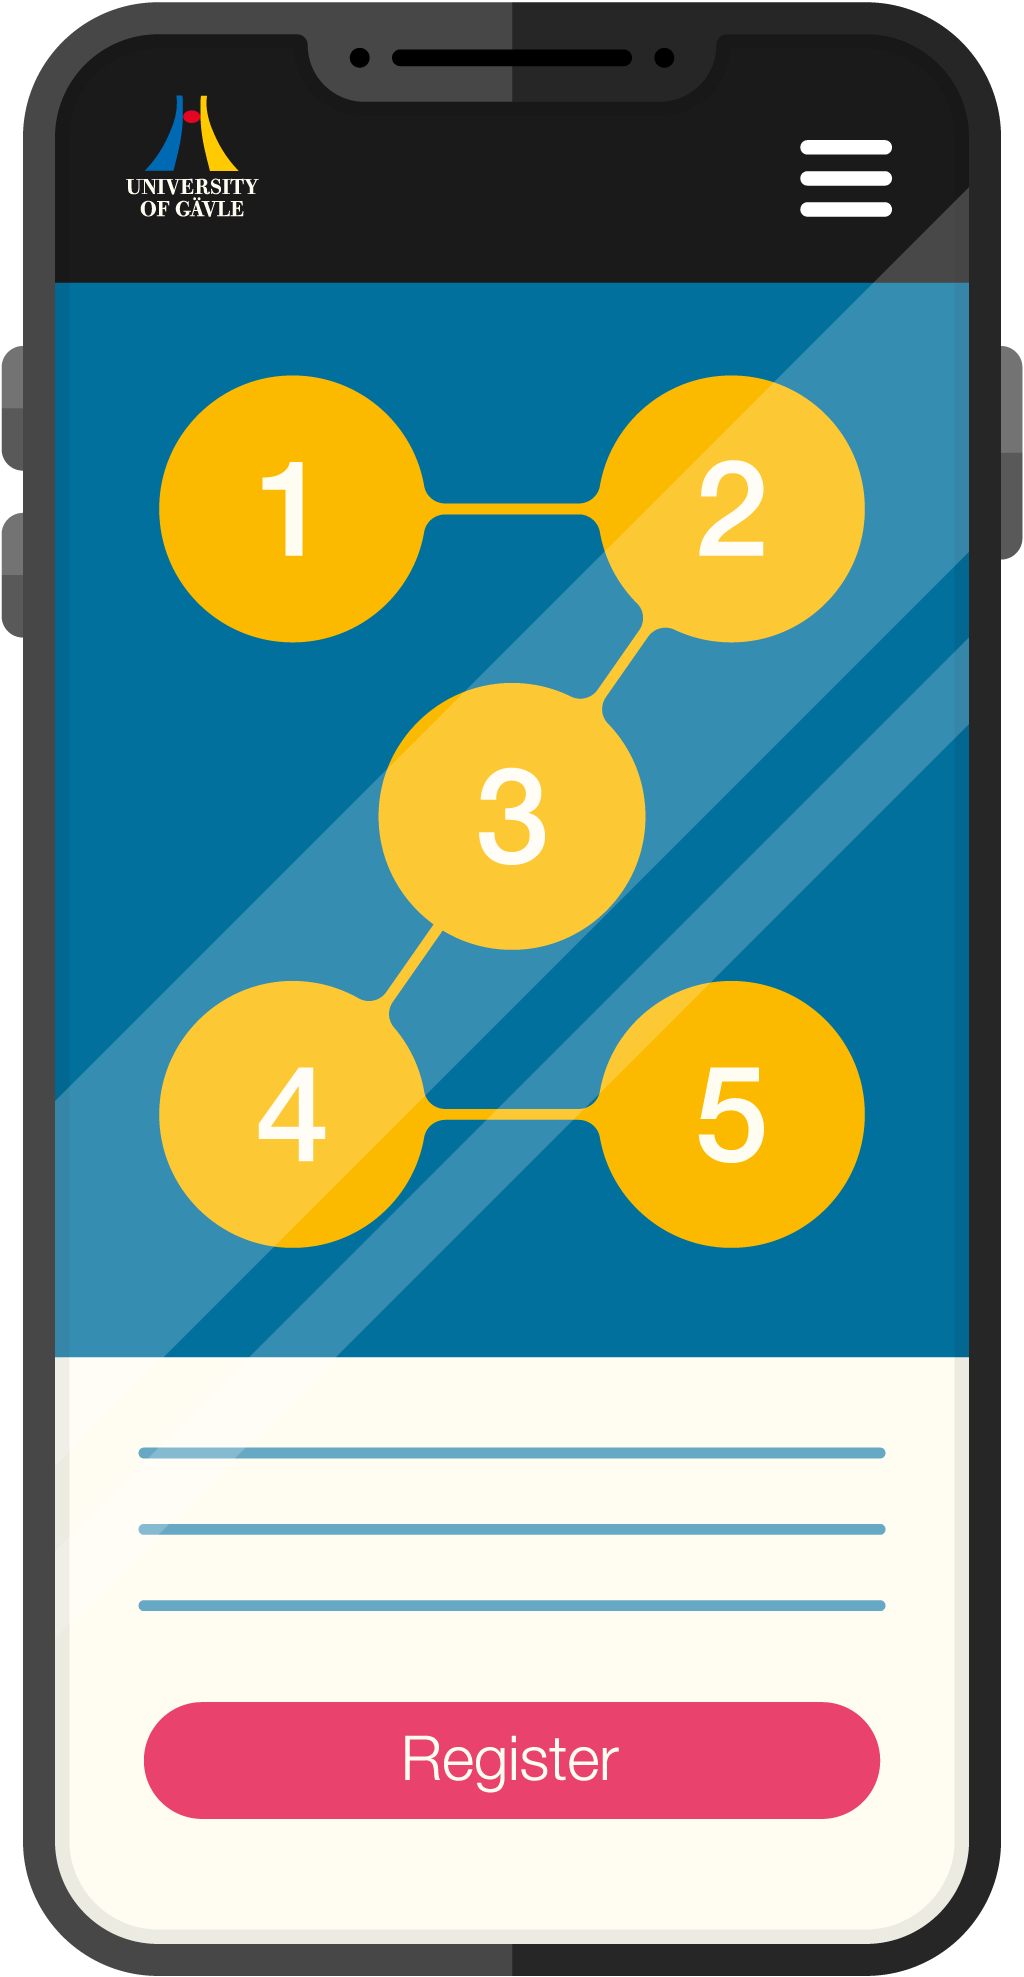 Mobile phone showing 5 dots connected illustrating the 5 step quick guide